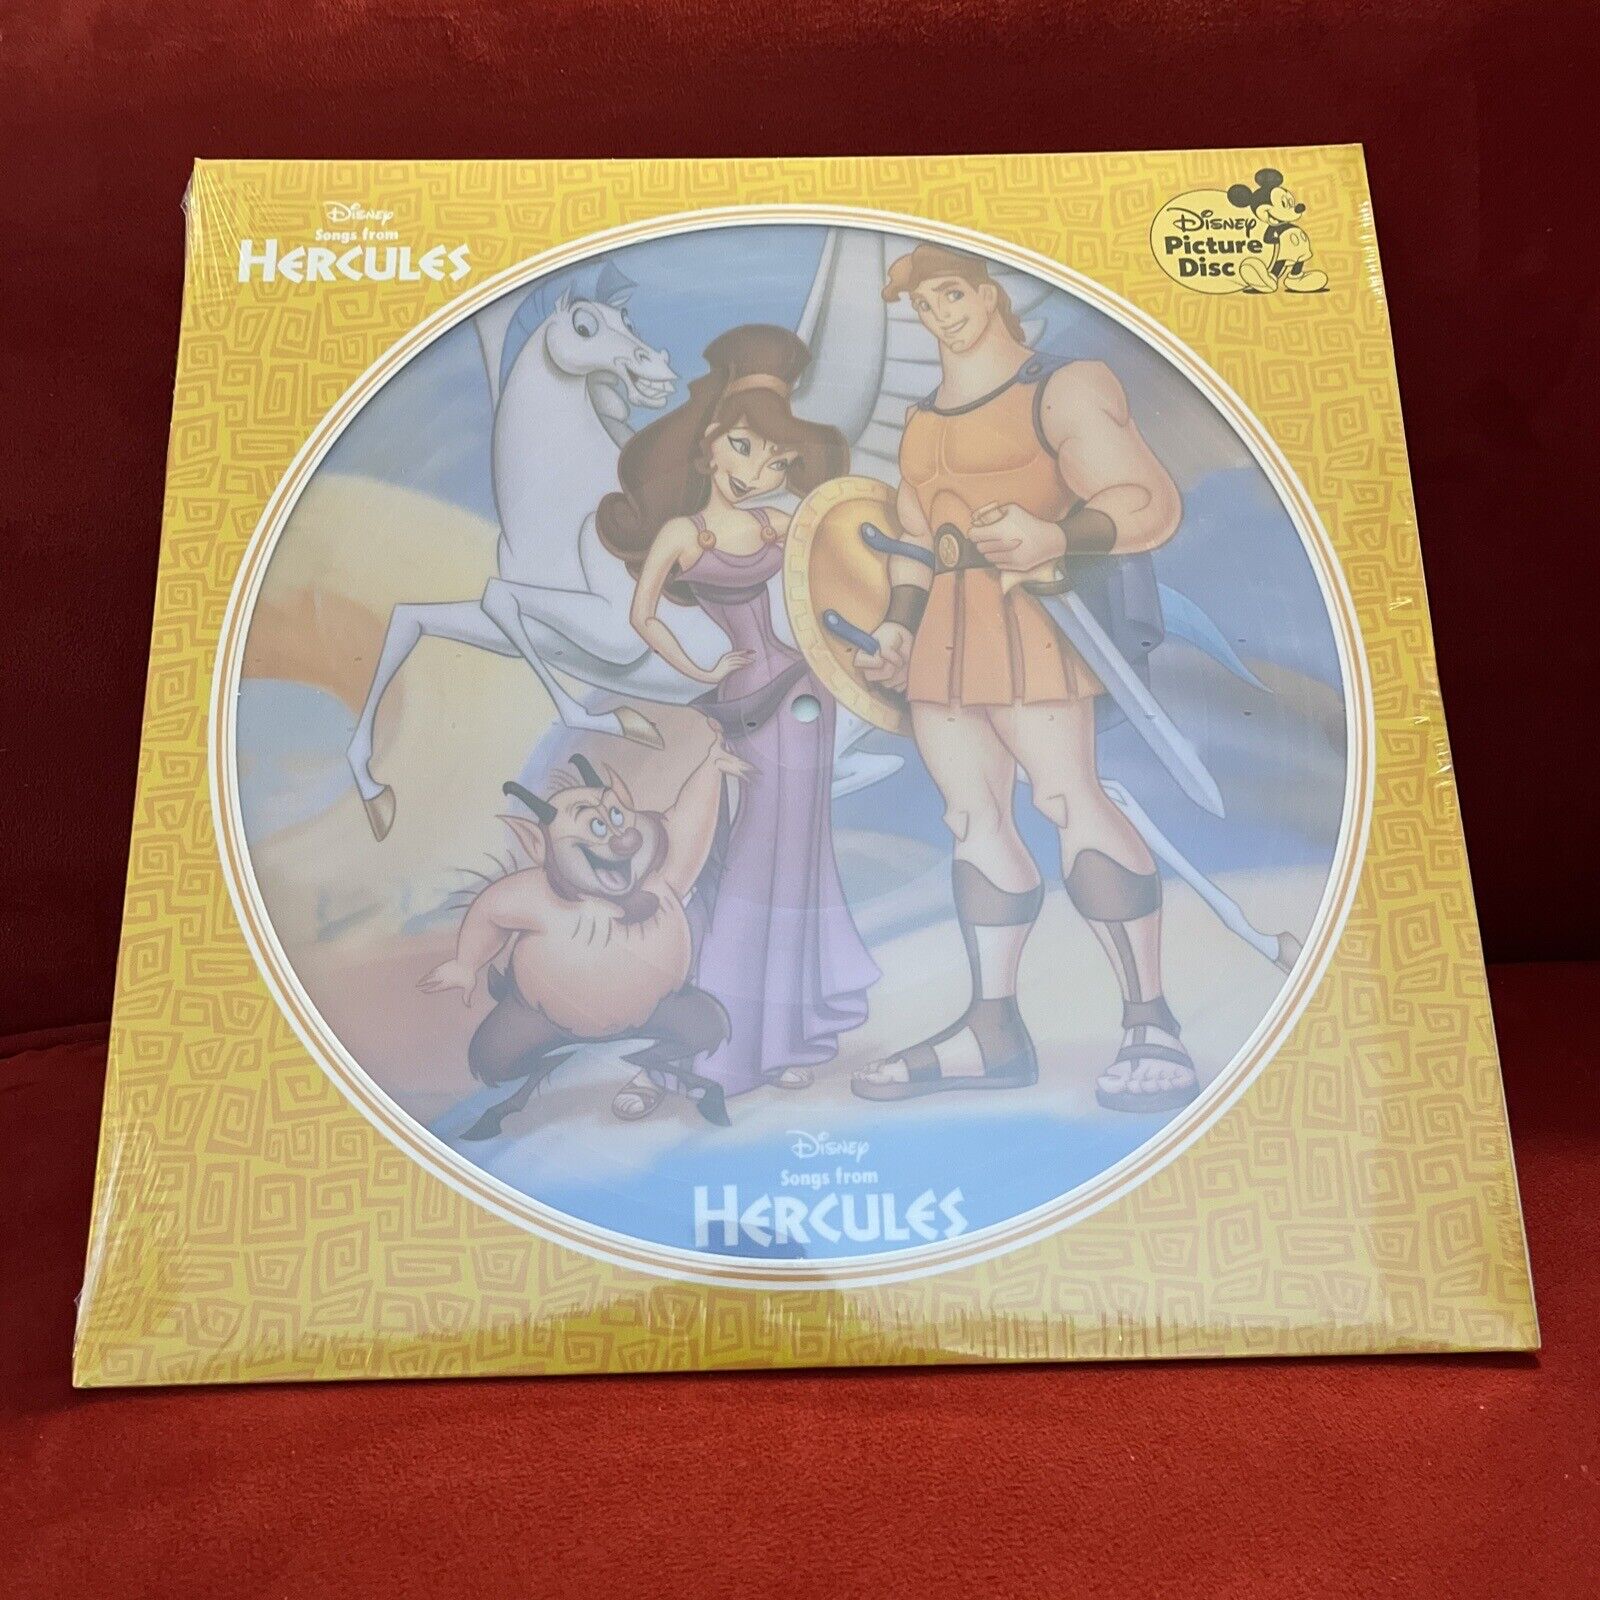 NEW Walt Disney Songs From Hercules Picture Disc Vinyl Record Michael Bolton